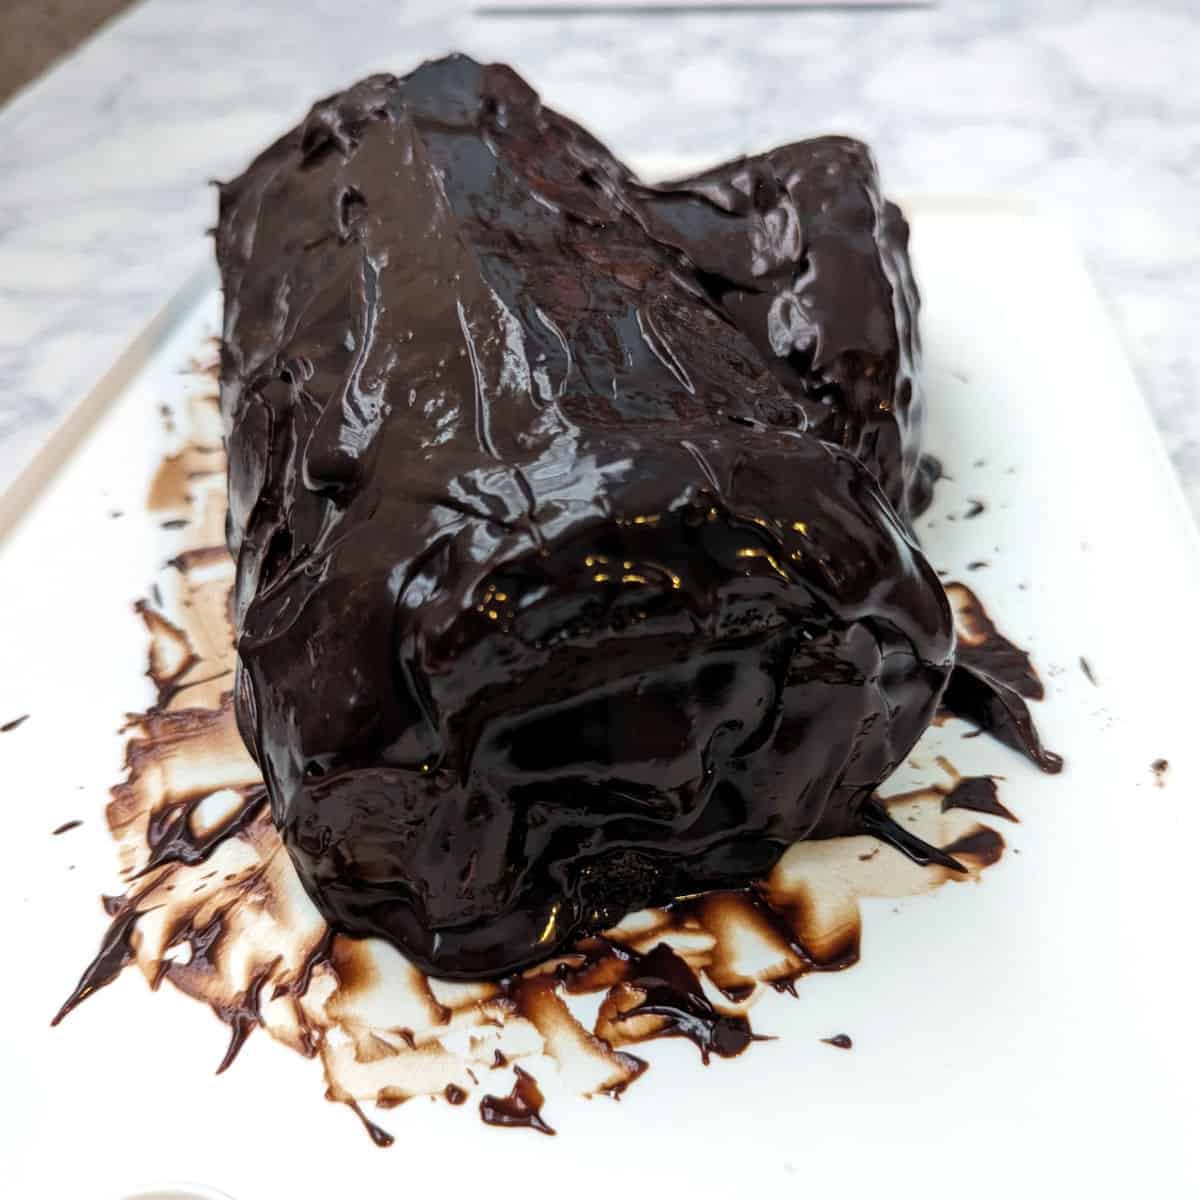 yule log with the cut ends covered with ganache